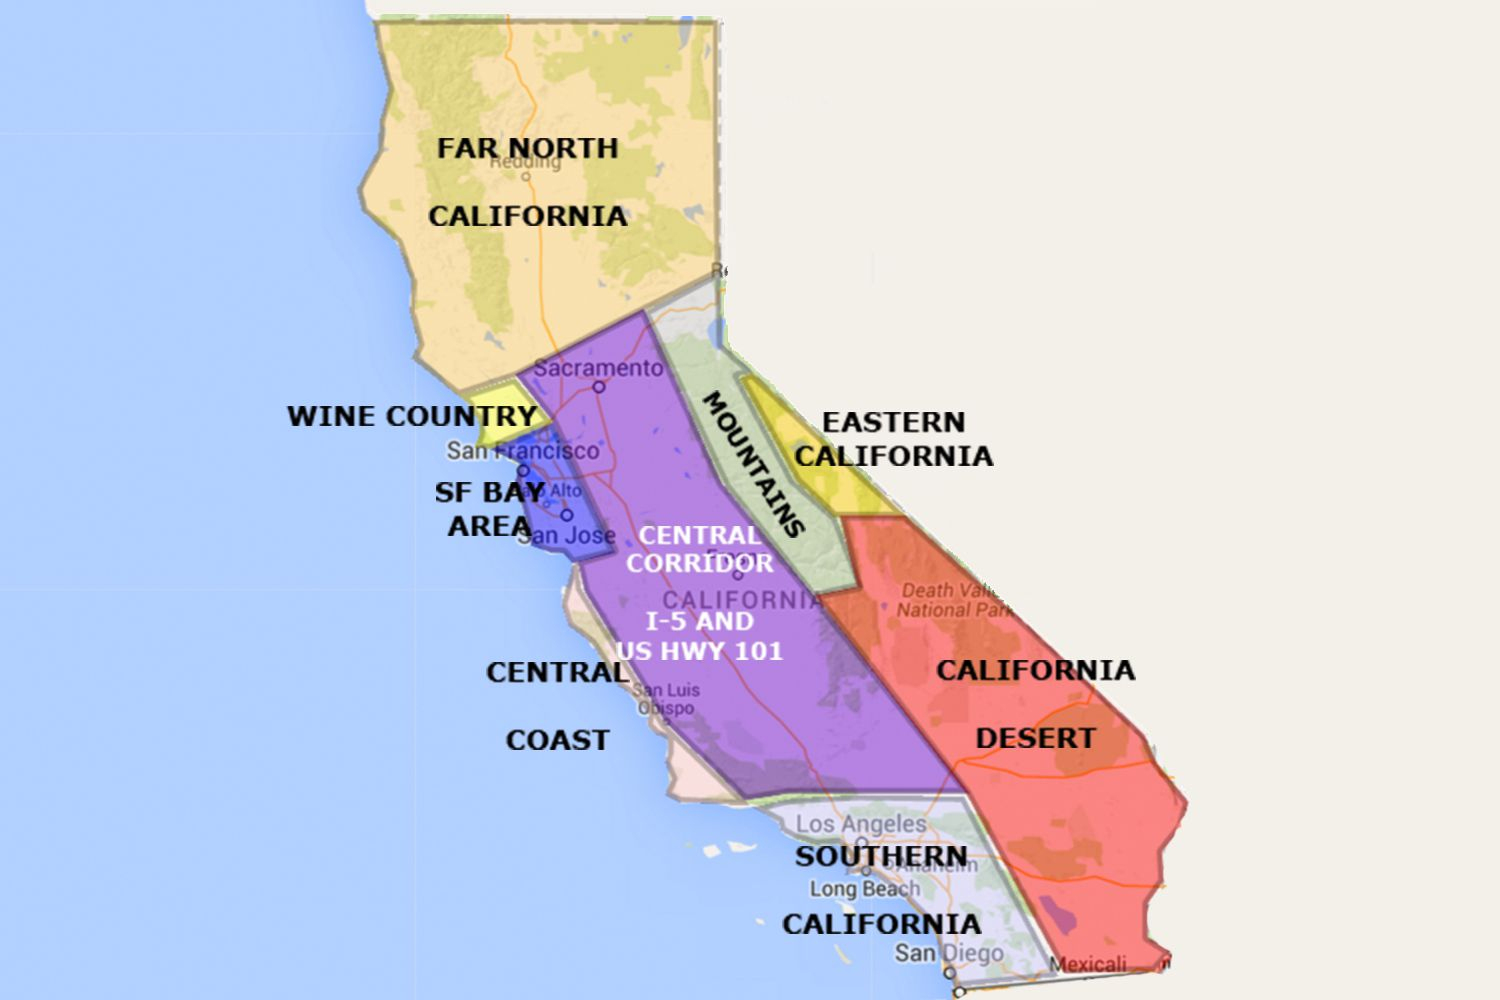 Maps Of California - Created For Visitors And Travelers - Northern California Attractions Map